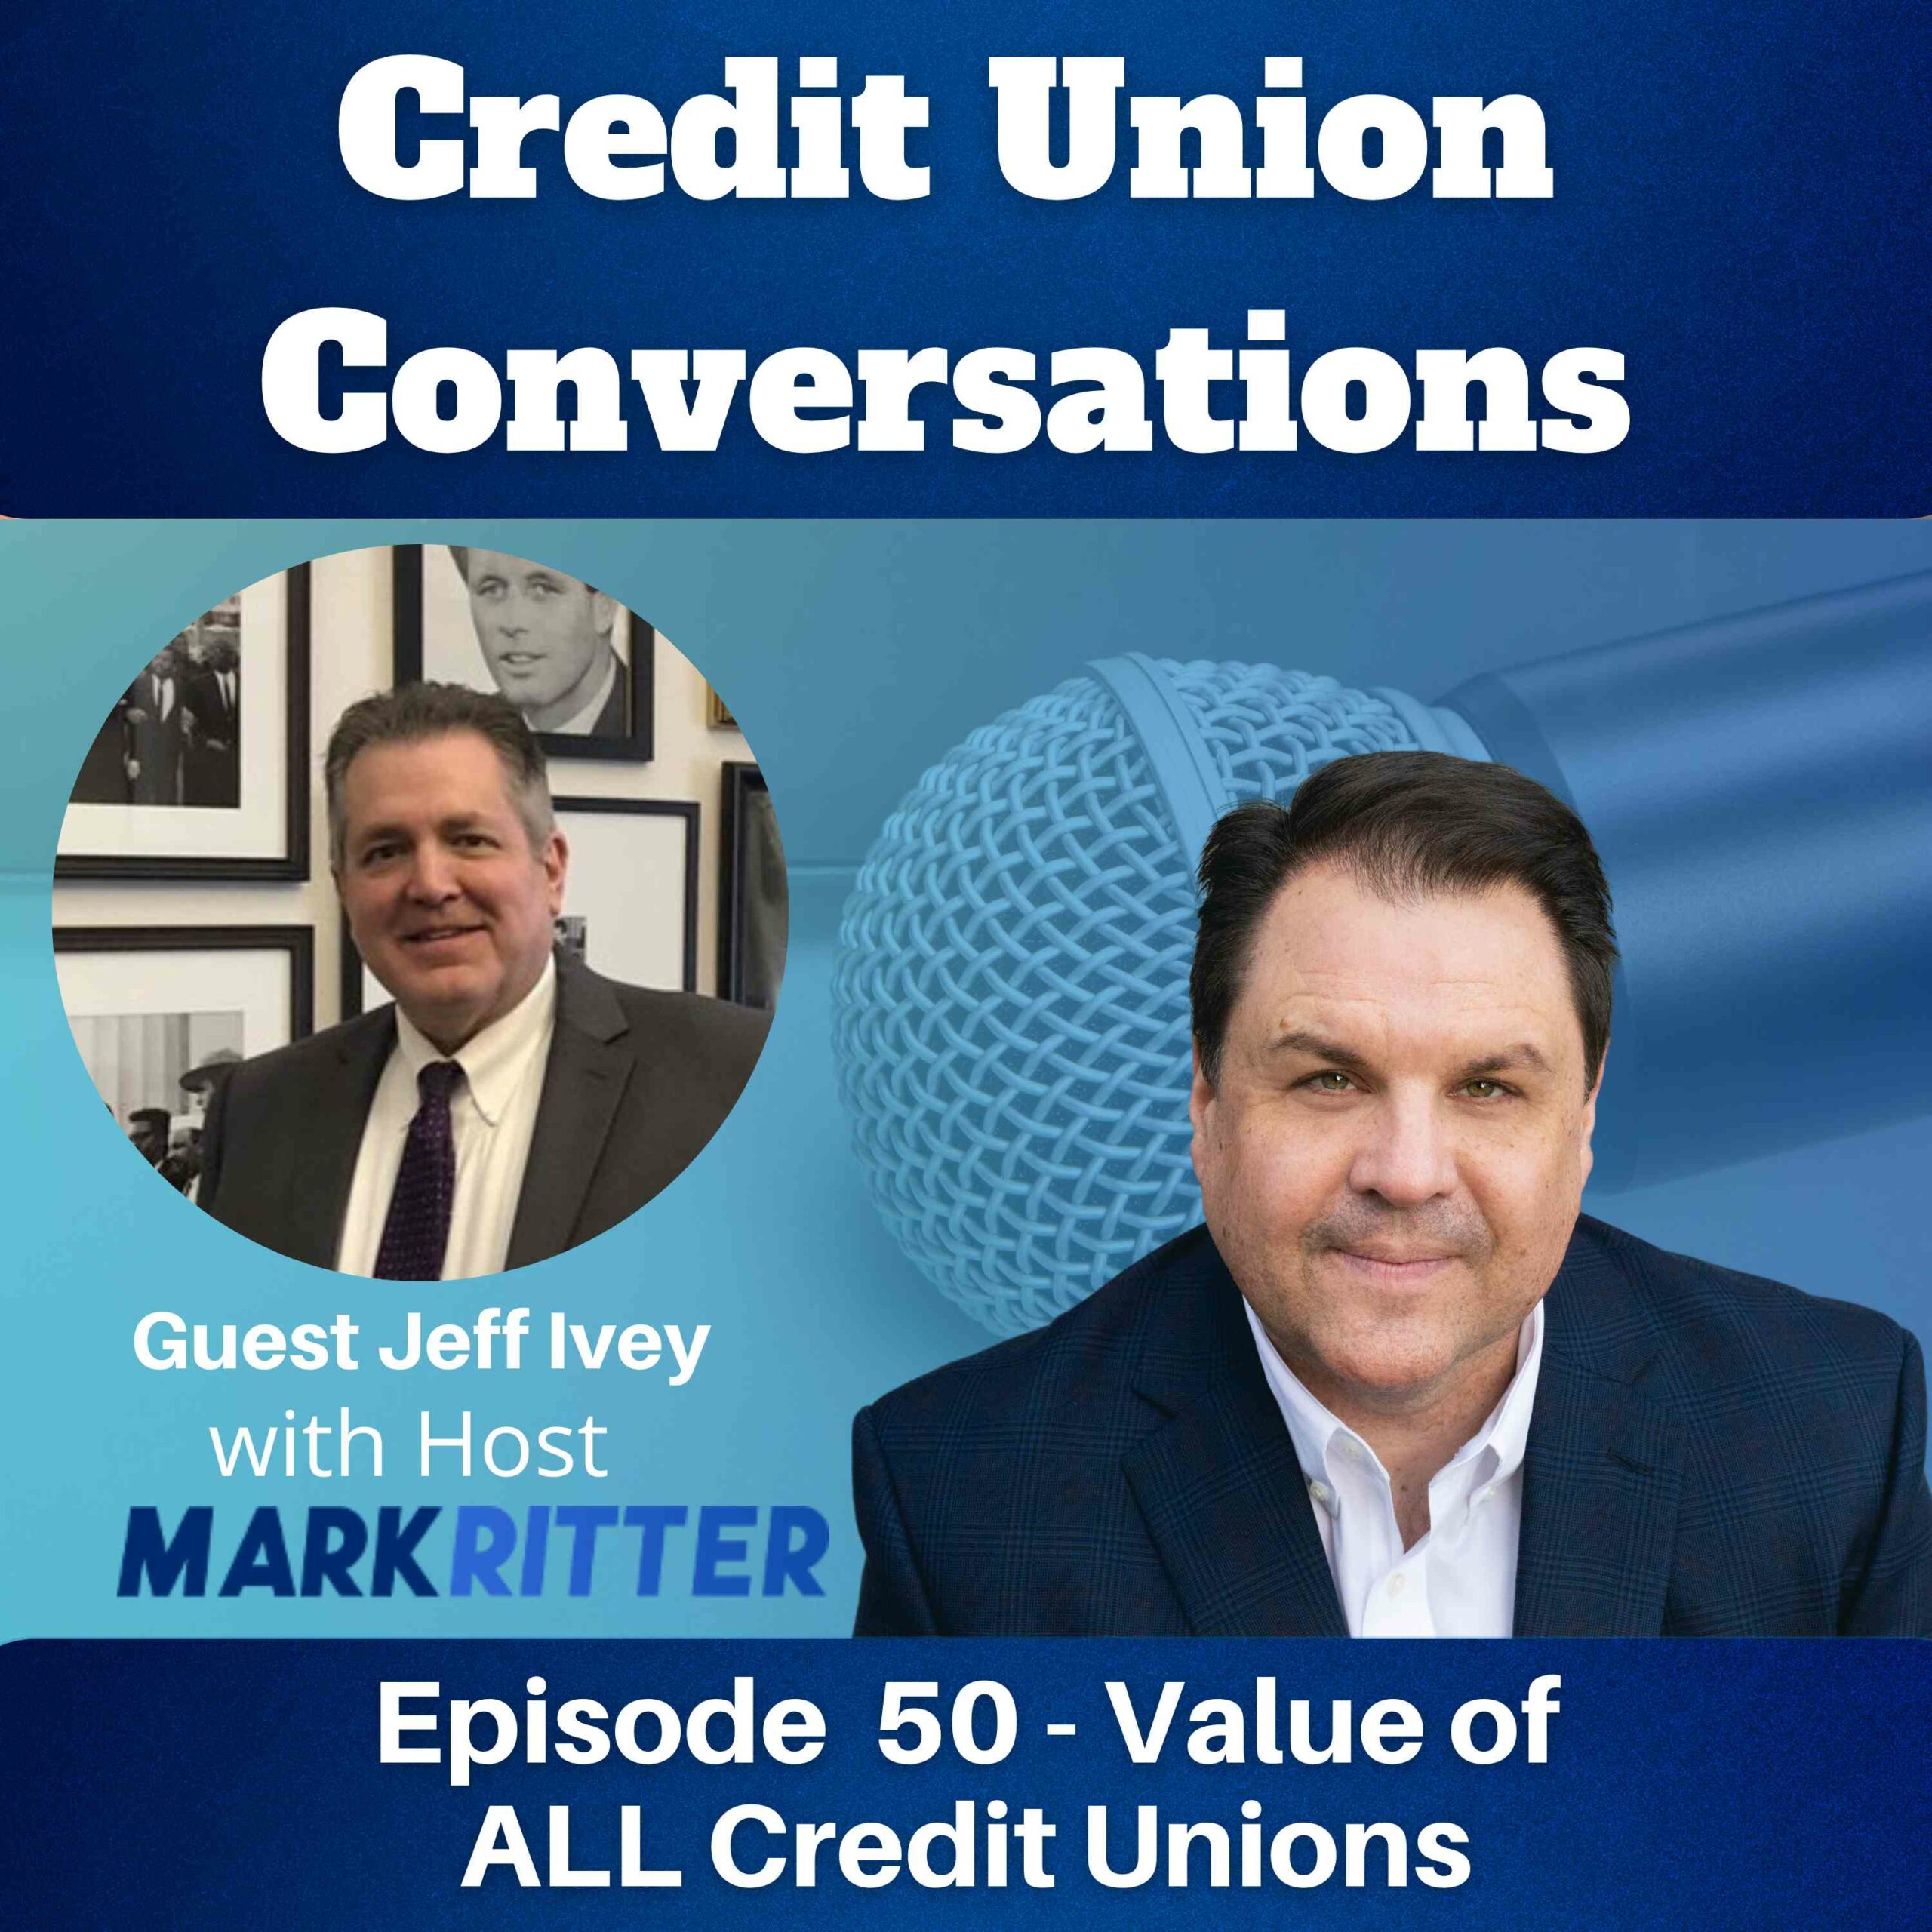 Value of ALL Credit Unions